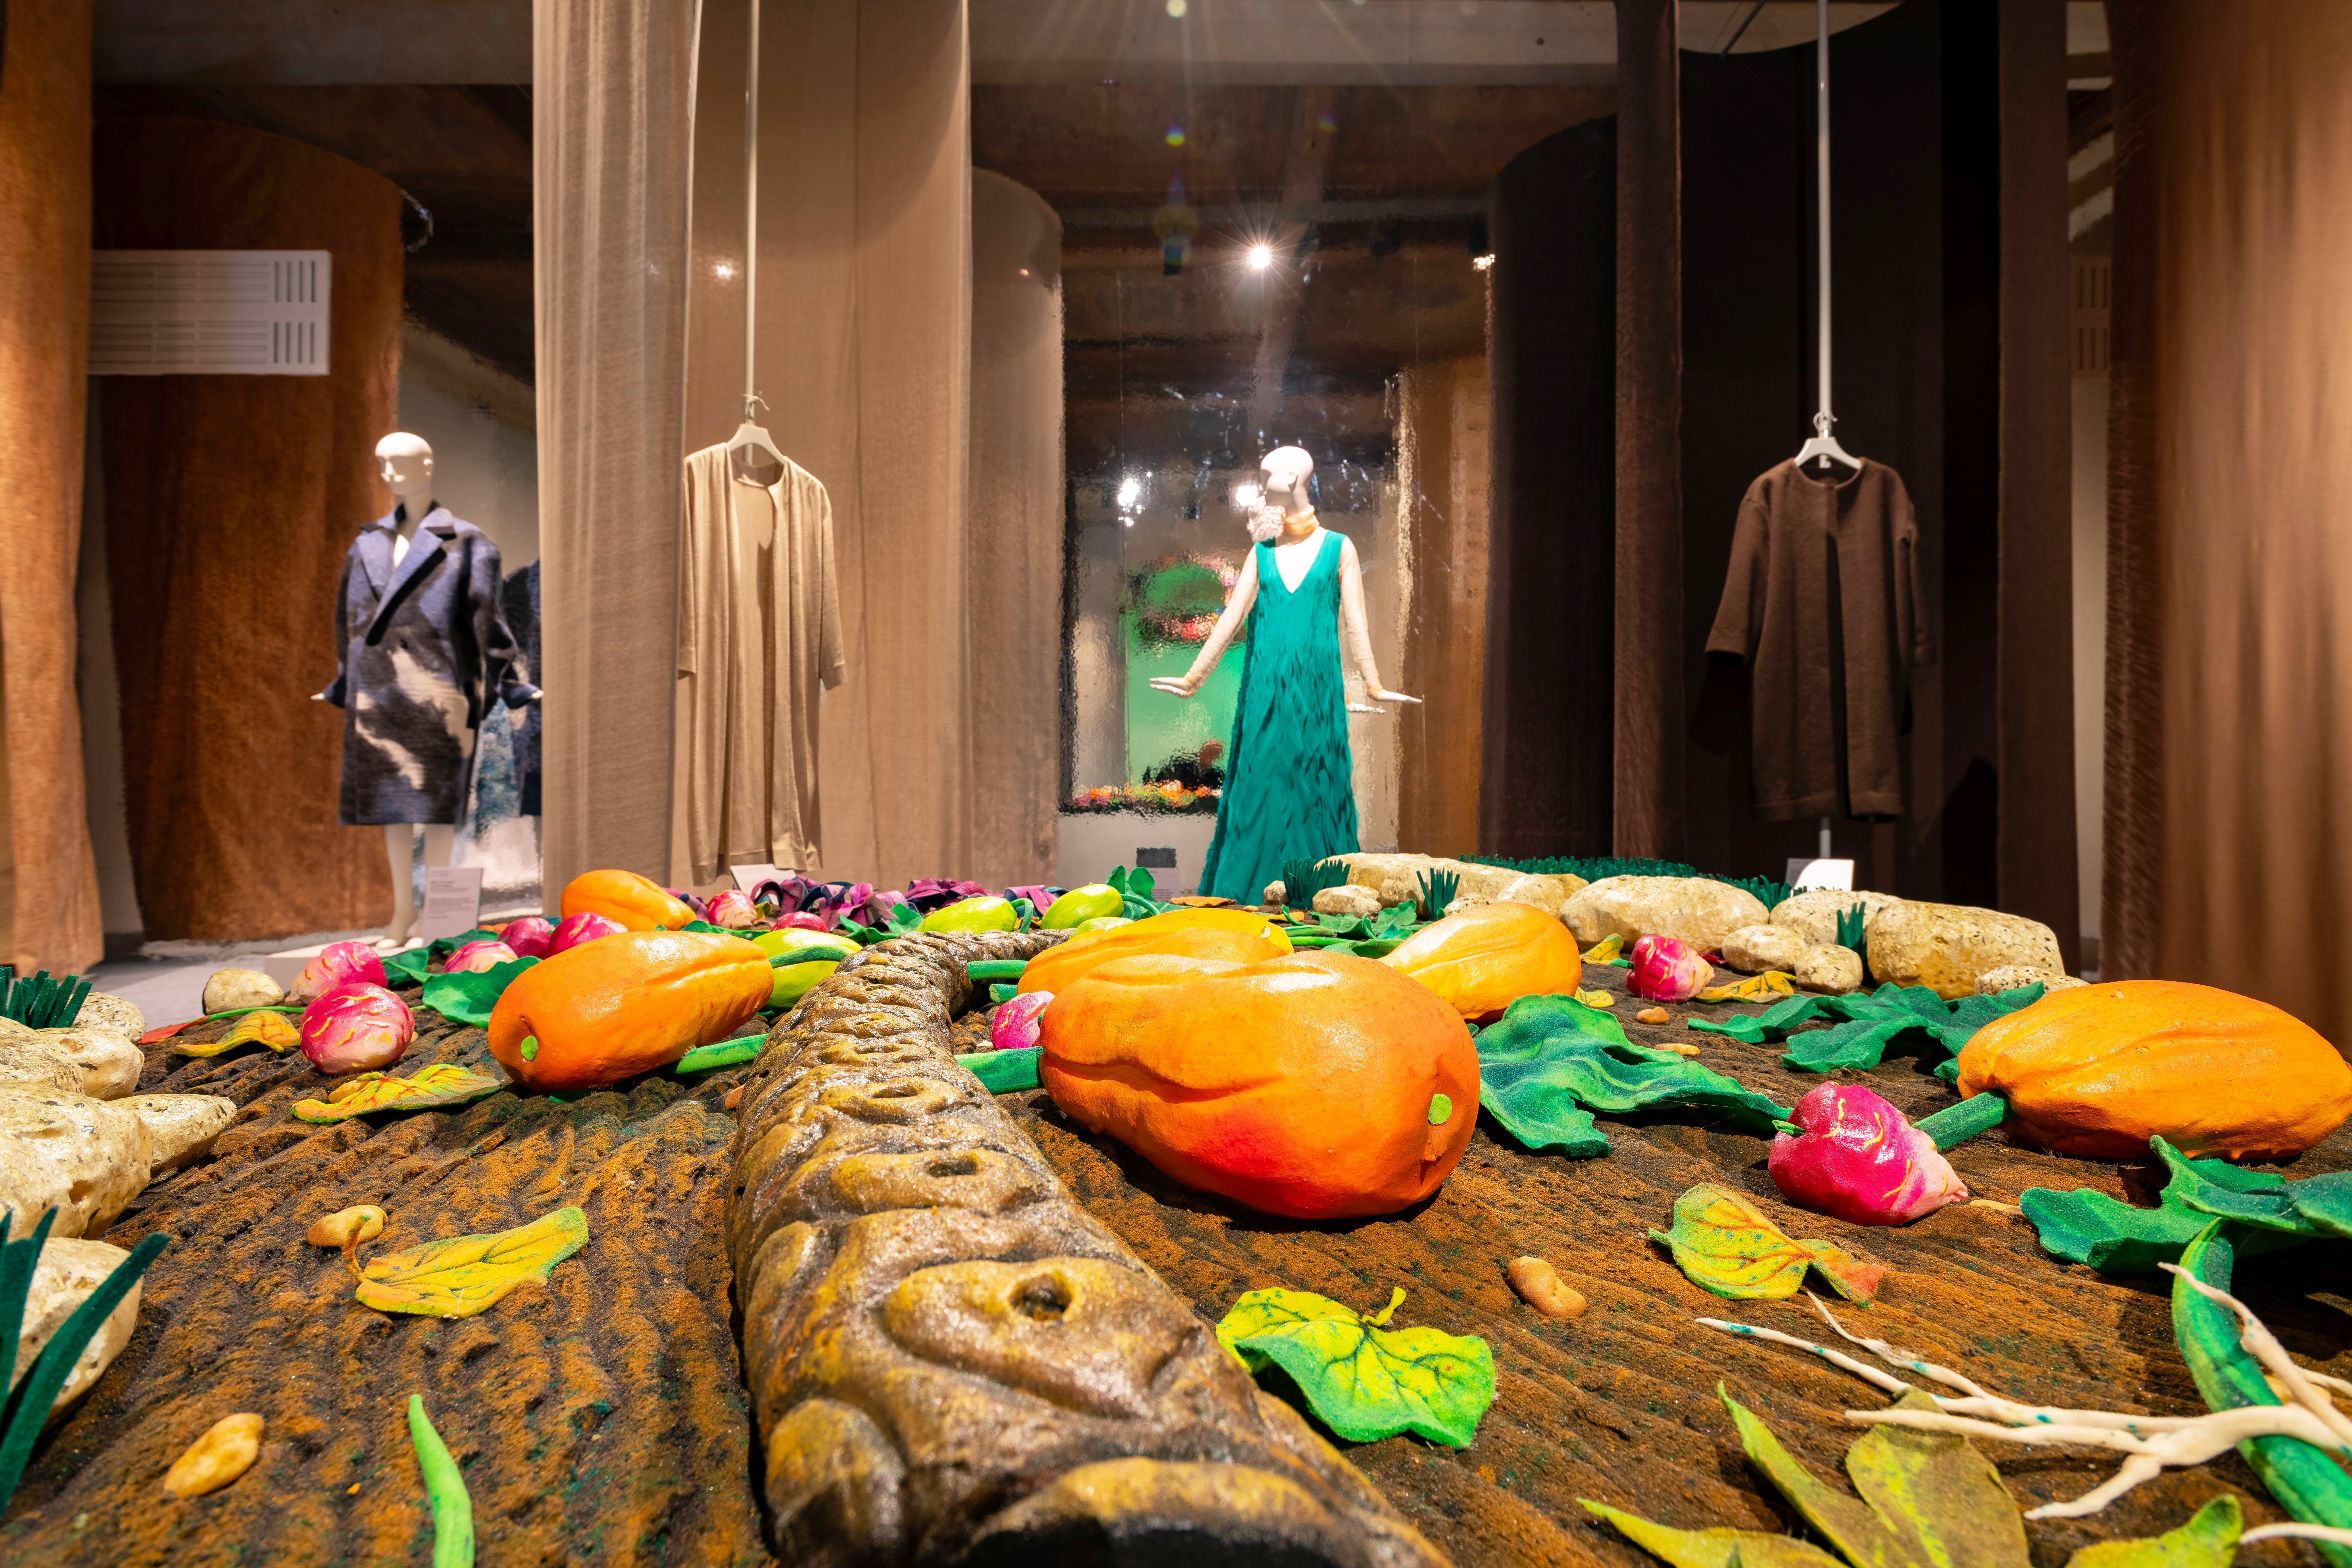 The Sustainable Thinking exhibition at Museo Salvatore Ferragamo explores Ferragamo sustainability from the pioneering spirit of the brand's founder Salvatore Ferragamo in his revolutionary use of natural, recycled and innovative materials.